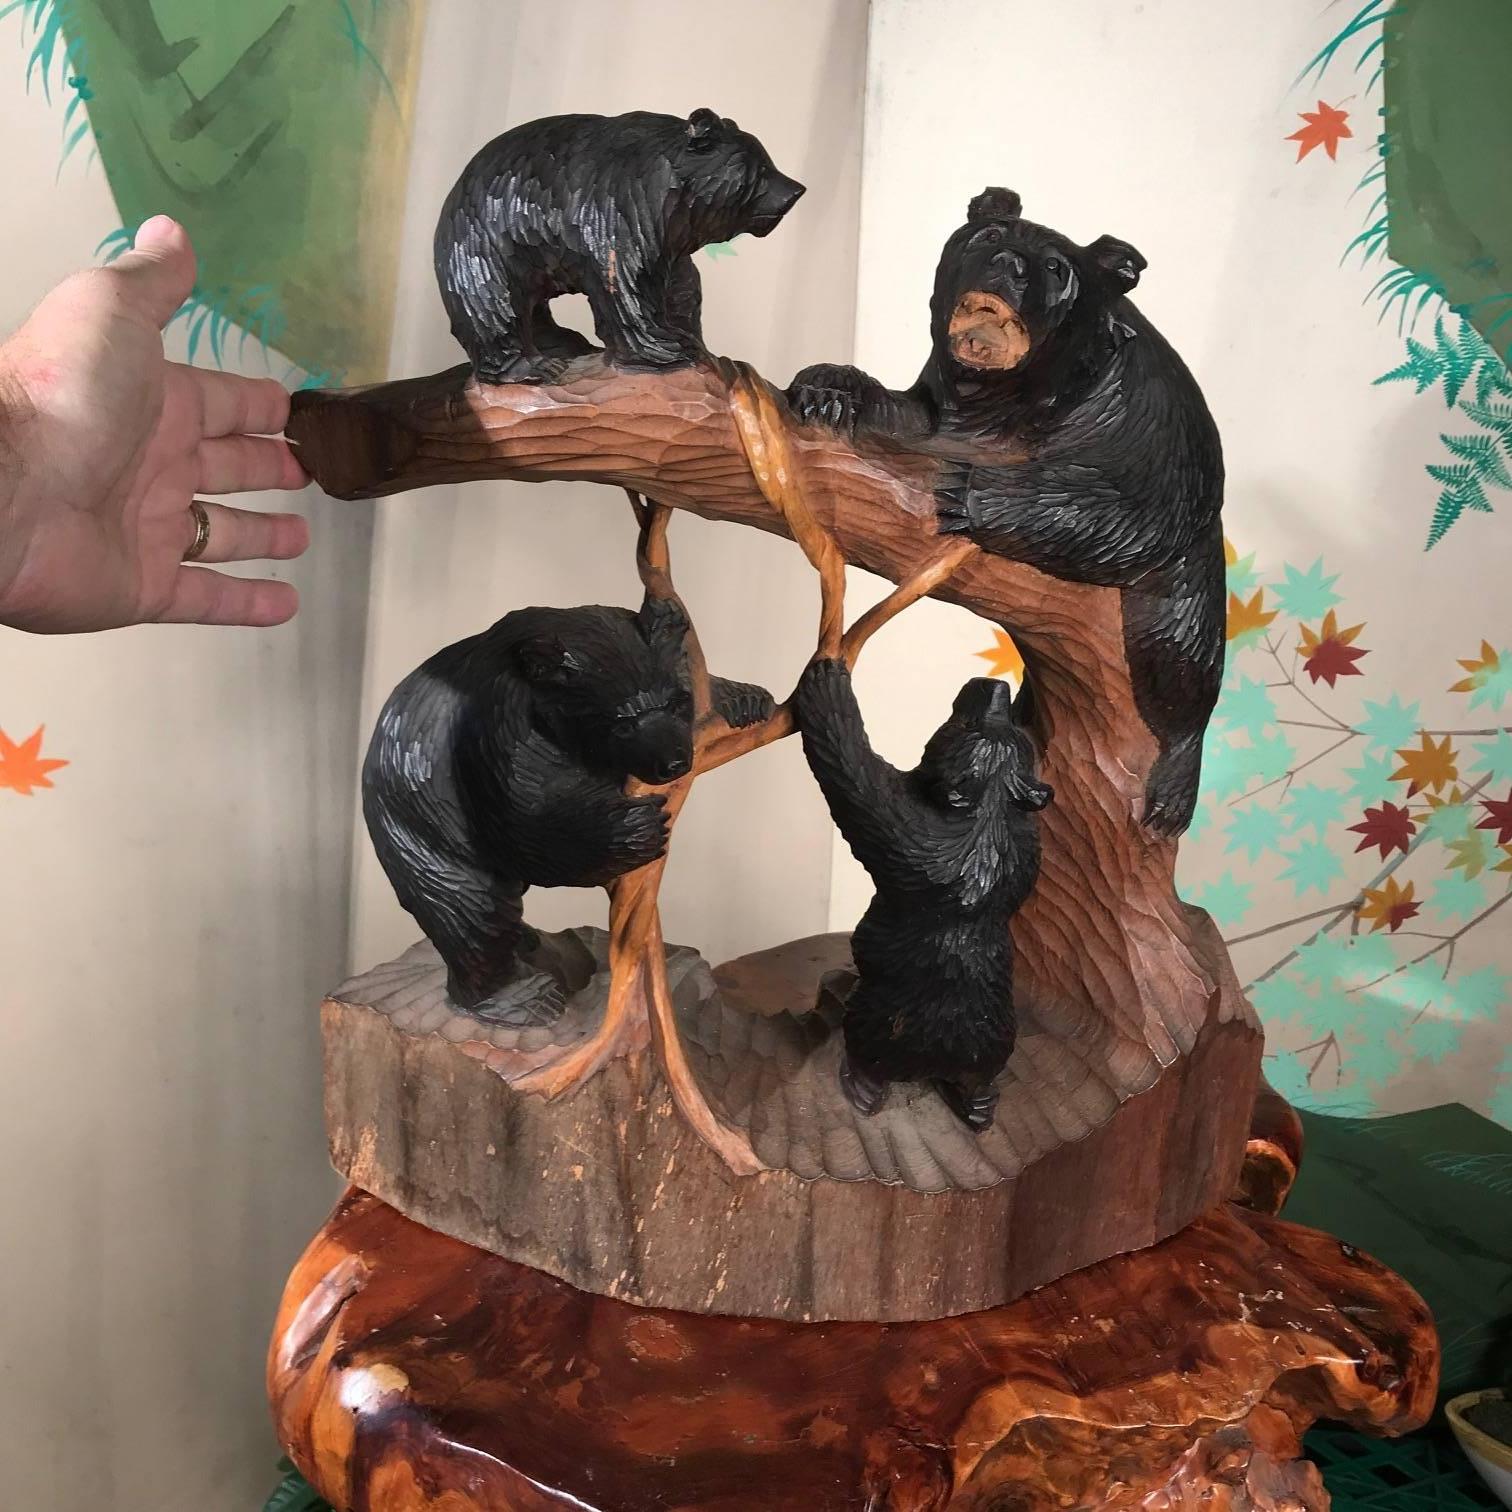 Showa Bear Family Climbing Tree, Old Japan Handcrafted Sculpture, Mint and Signed